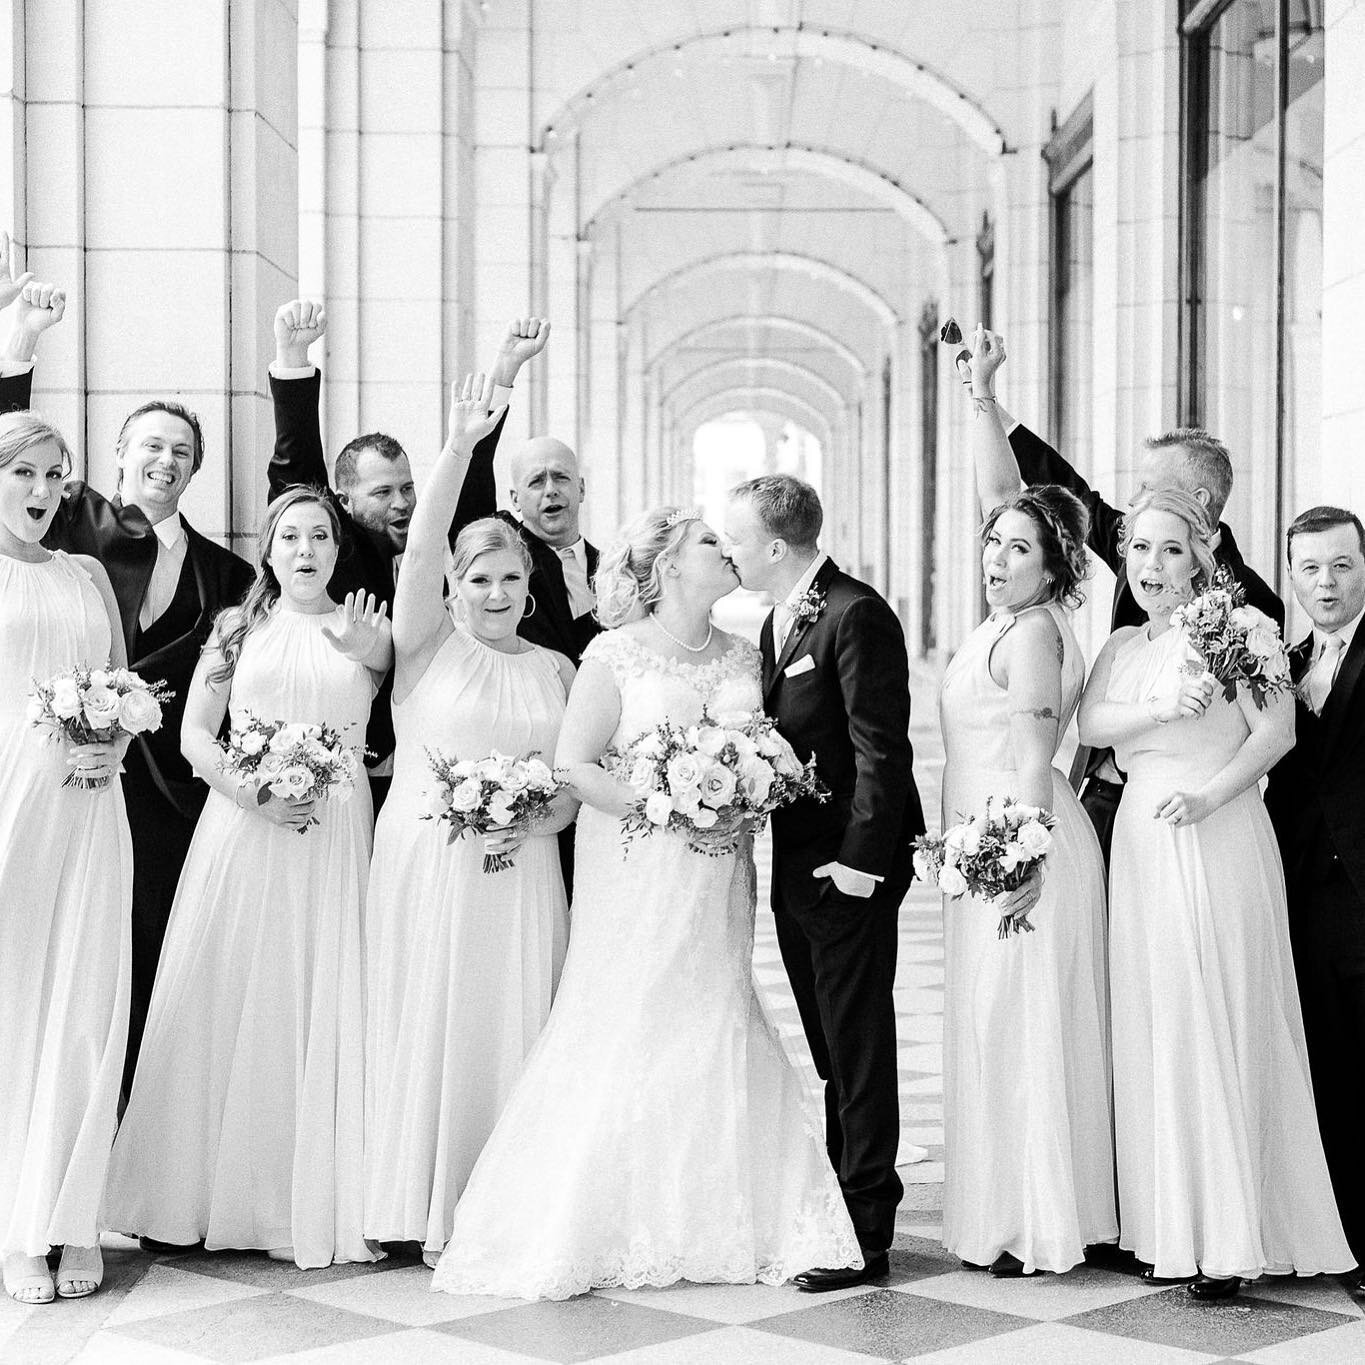 We can&rsquo;t wait until you&rsquo;re back with your big crew to say &ldquo;I DO&rdquo;! Did you have a big wedding party?? Tell us about it! 

Photo: @kristynharderphotography 
Flowers: @flowersbyjanie 
.
.
.
.
.

#yyc  #yycwedding #calgary #calgar